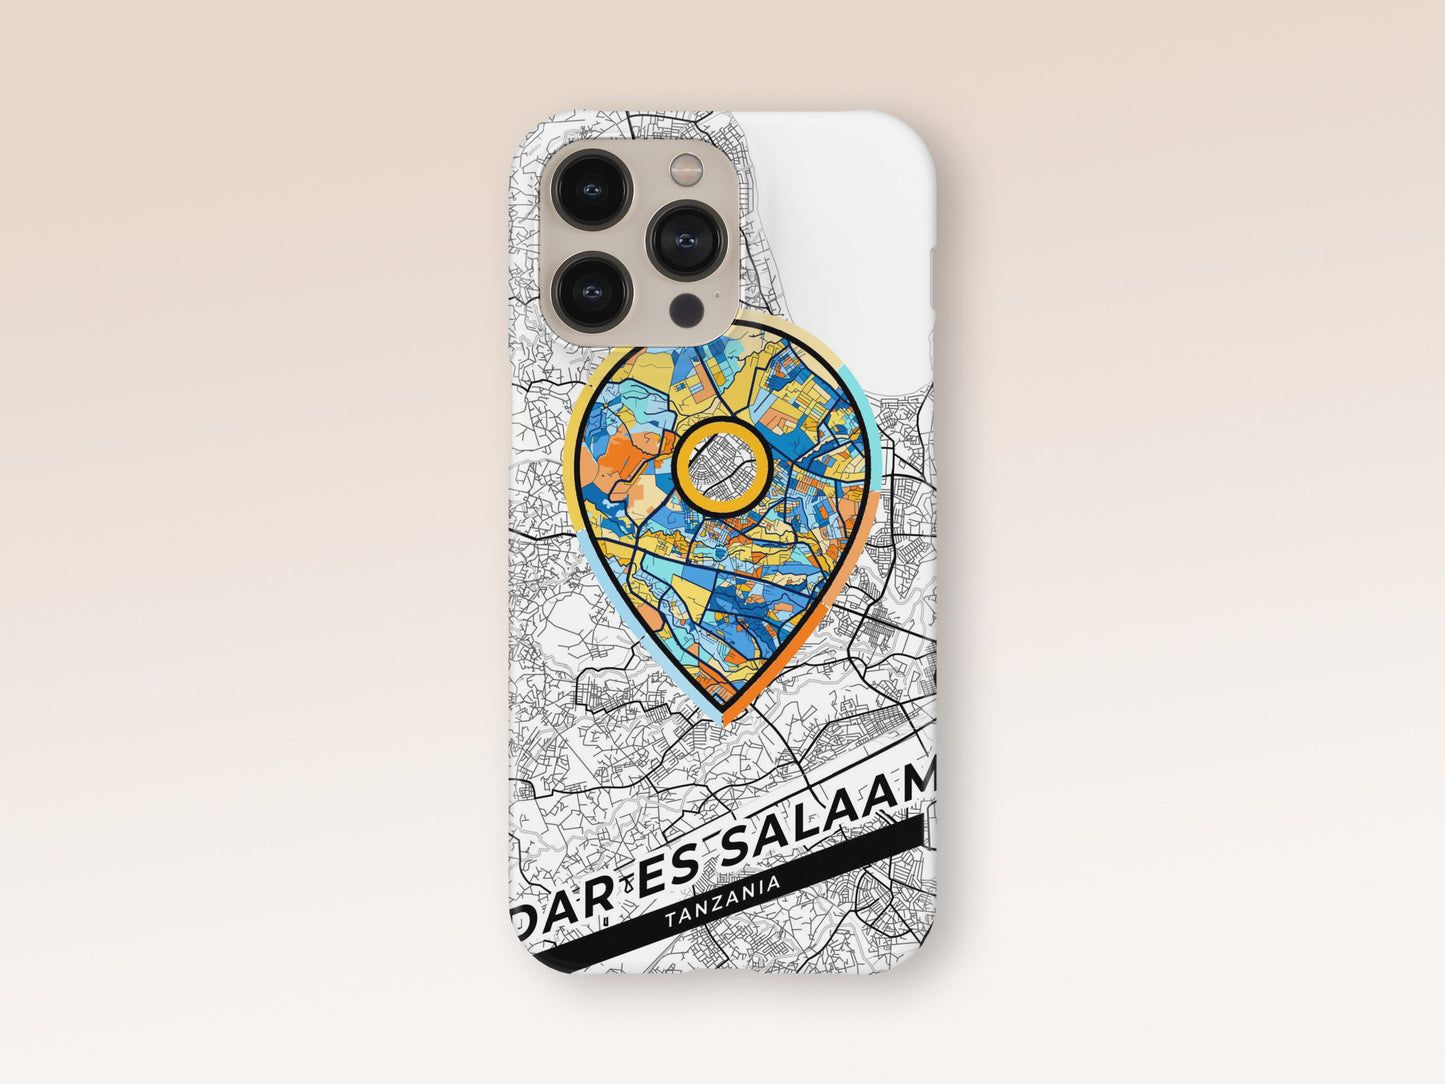 Dar Es Salaam Tanzania slim phone case with colorful icon. Birthday, wedding or housewarming gift. Couple match cases. 1